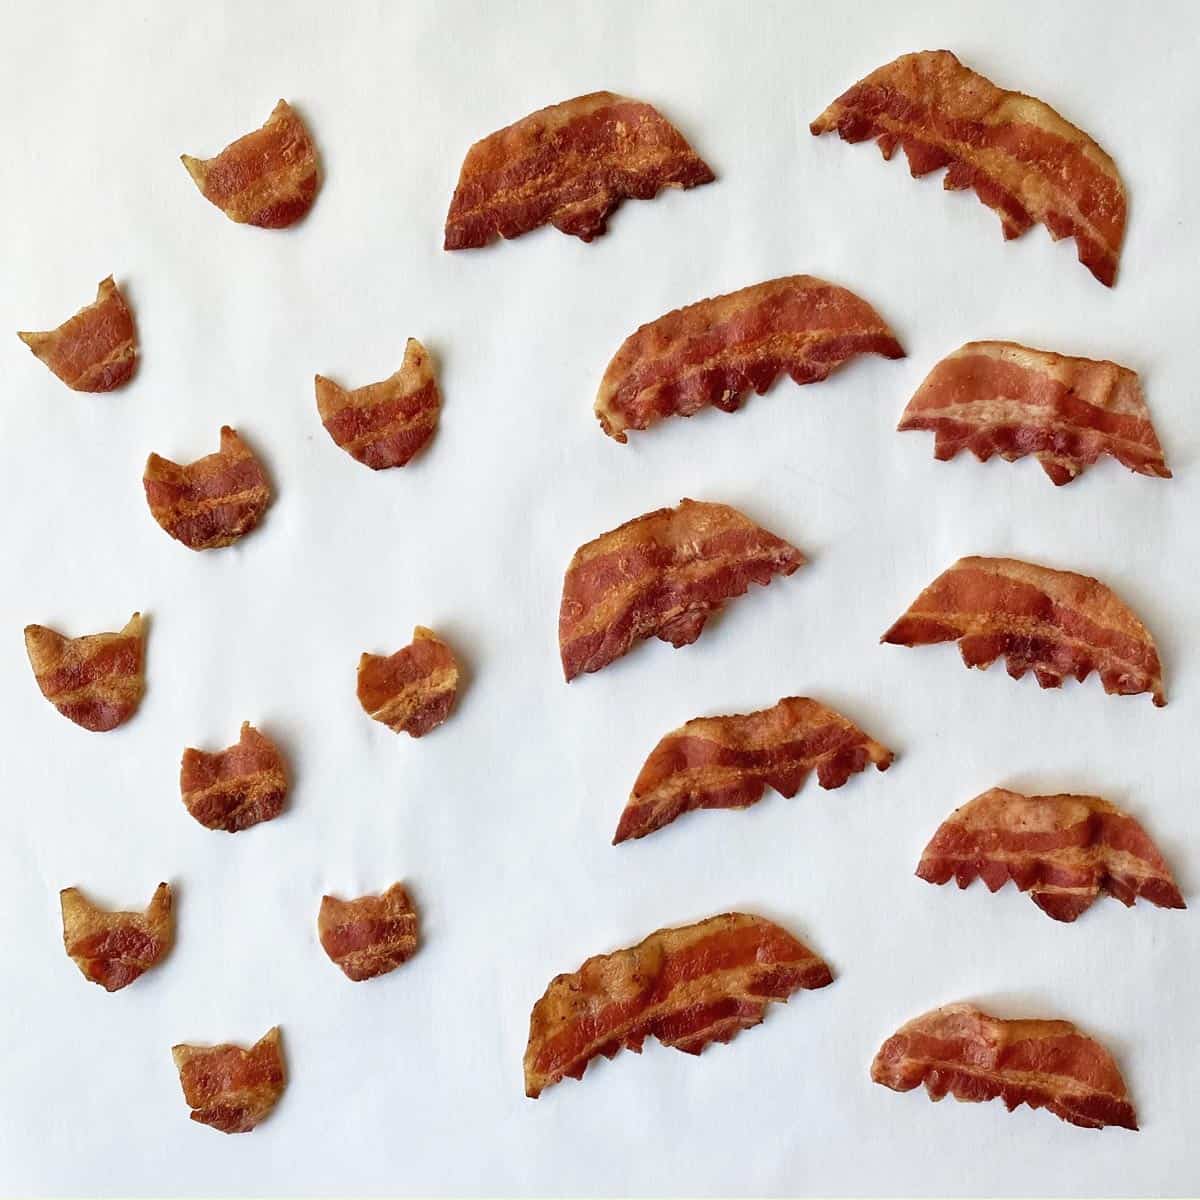 10 bat heads and 10 bat wings cut from pieces of cooked bacon.